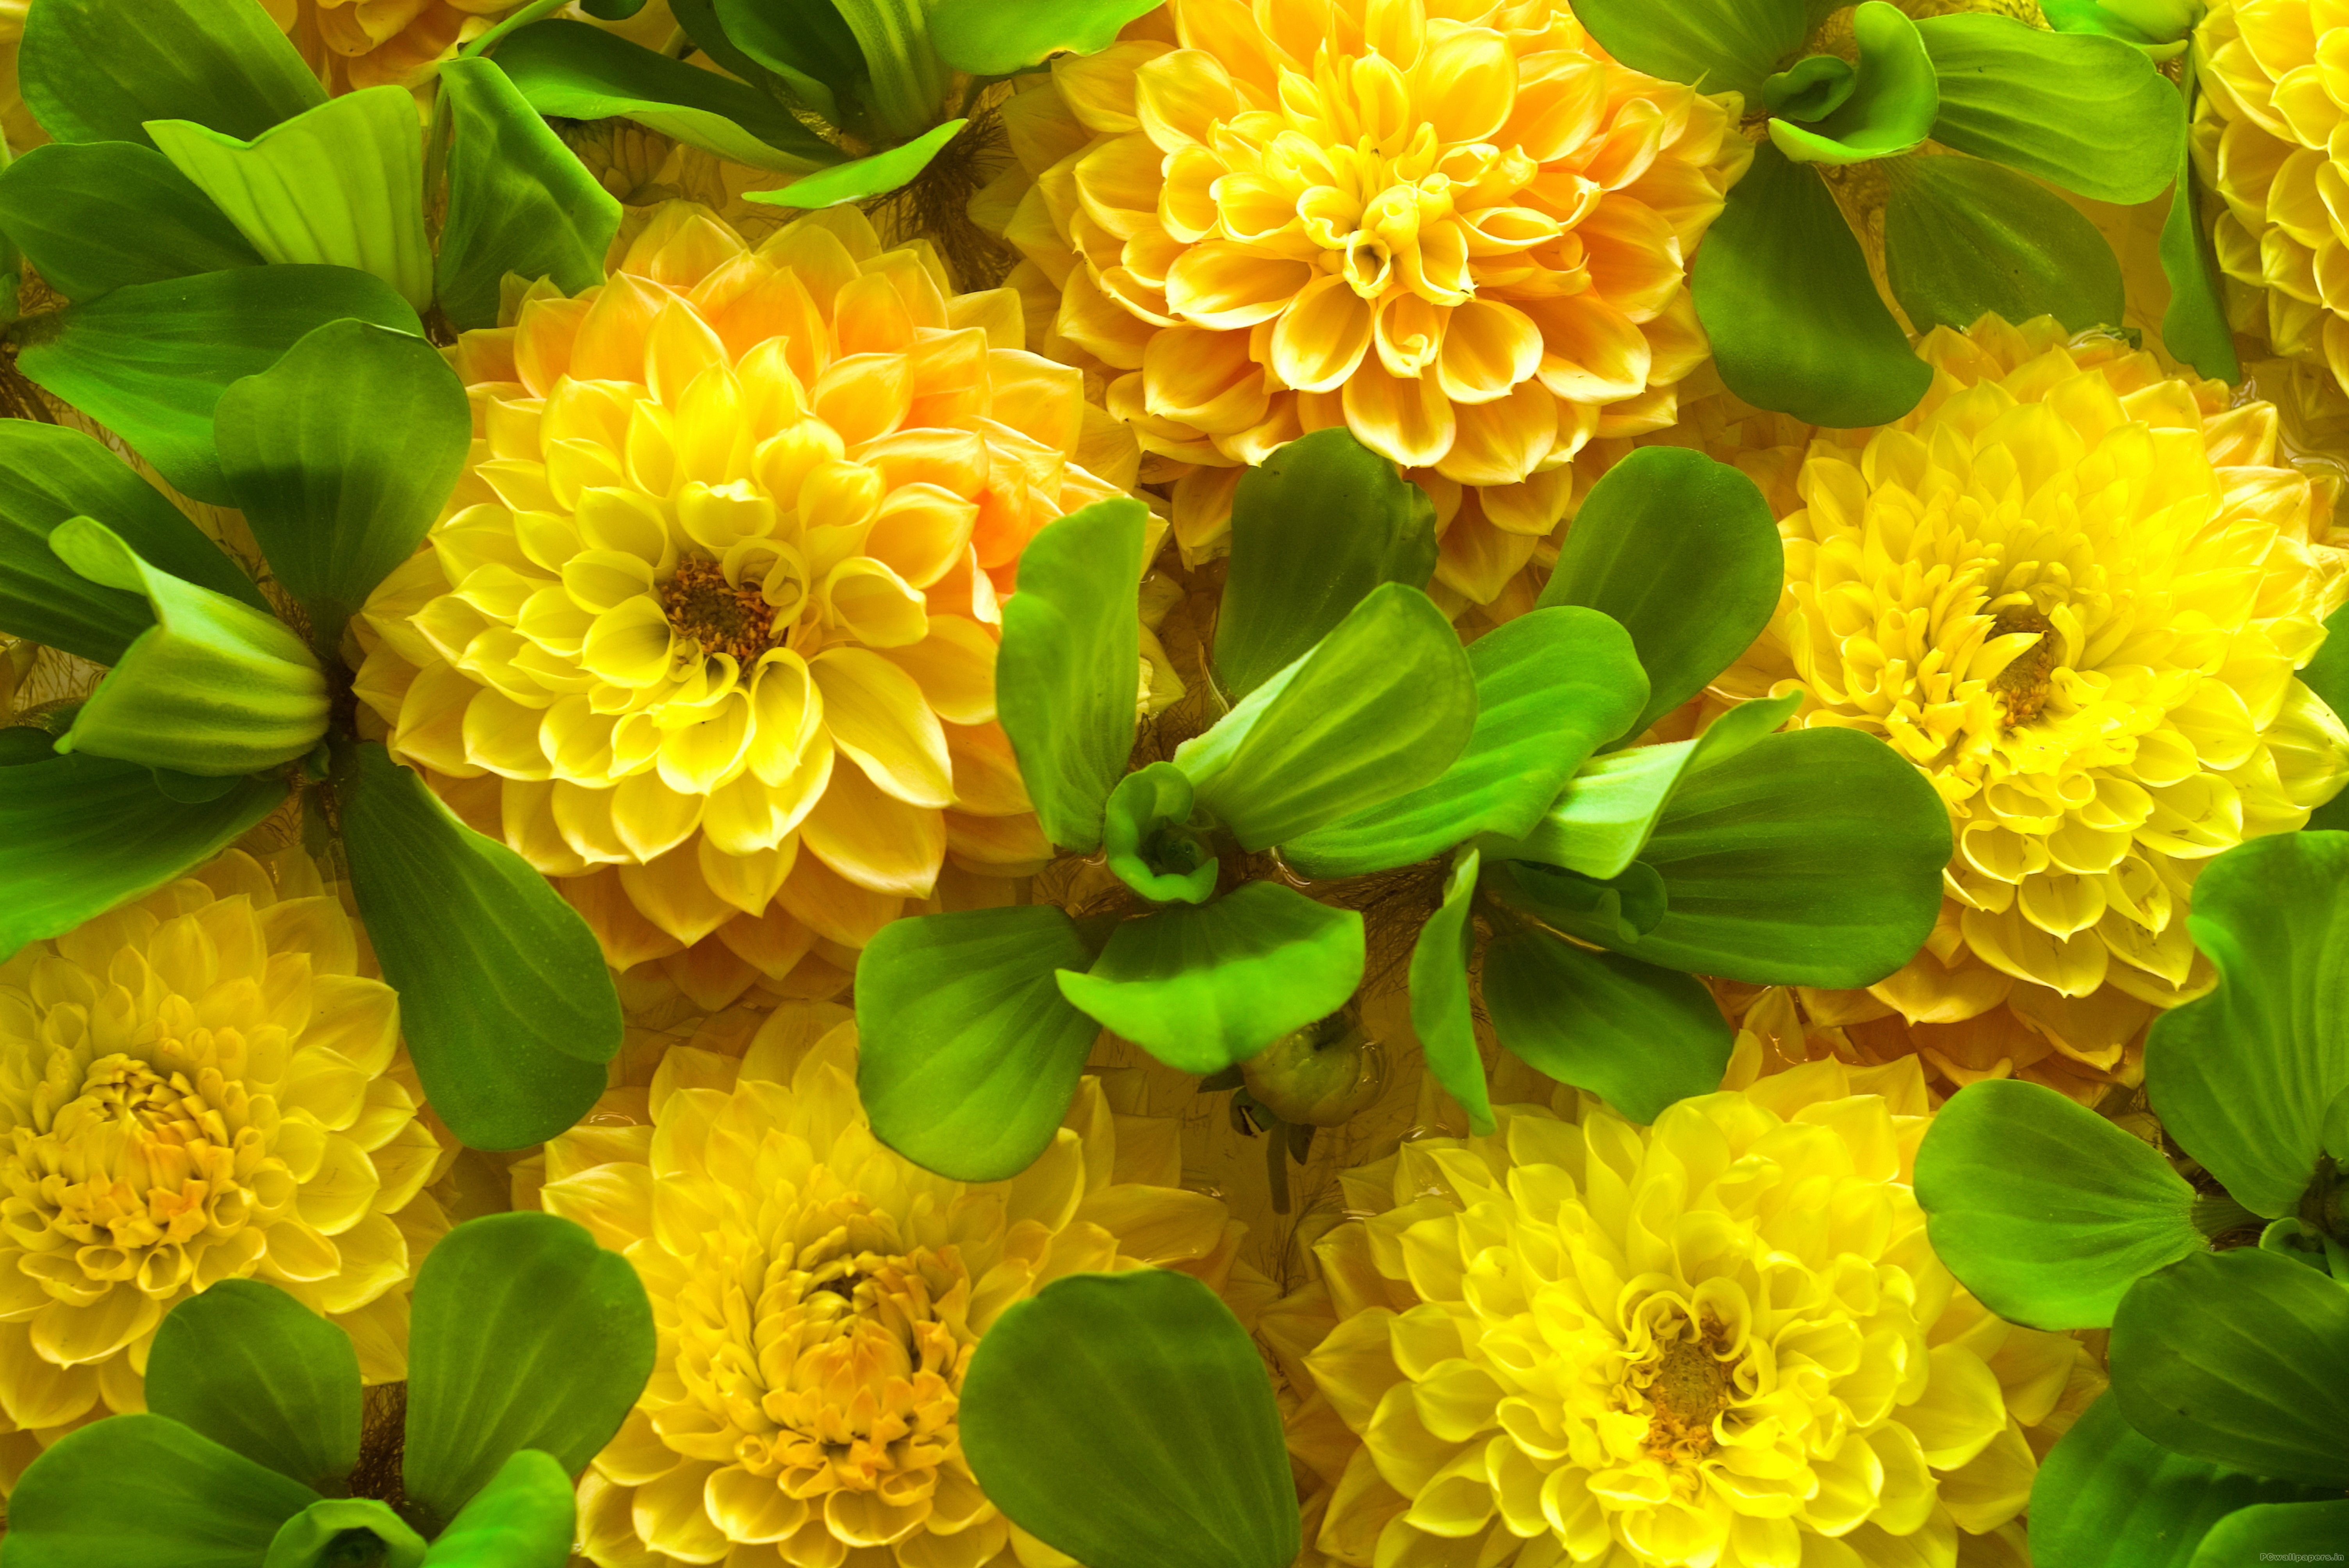 6016x4016 Cool Yellow Flowers Sunshine Free Download Image Yellow Flowers Dahlia Flower Beautiful Flowers Picture